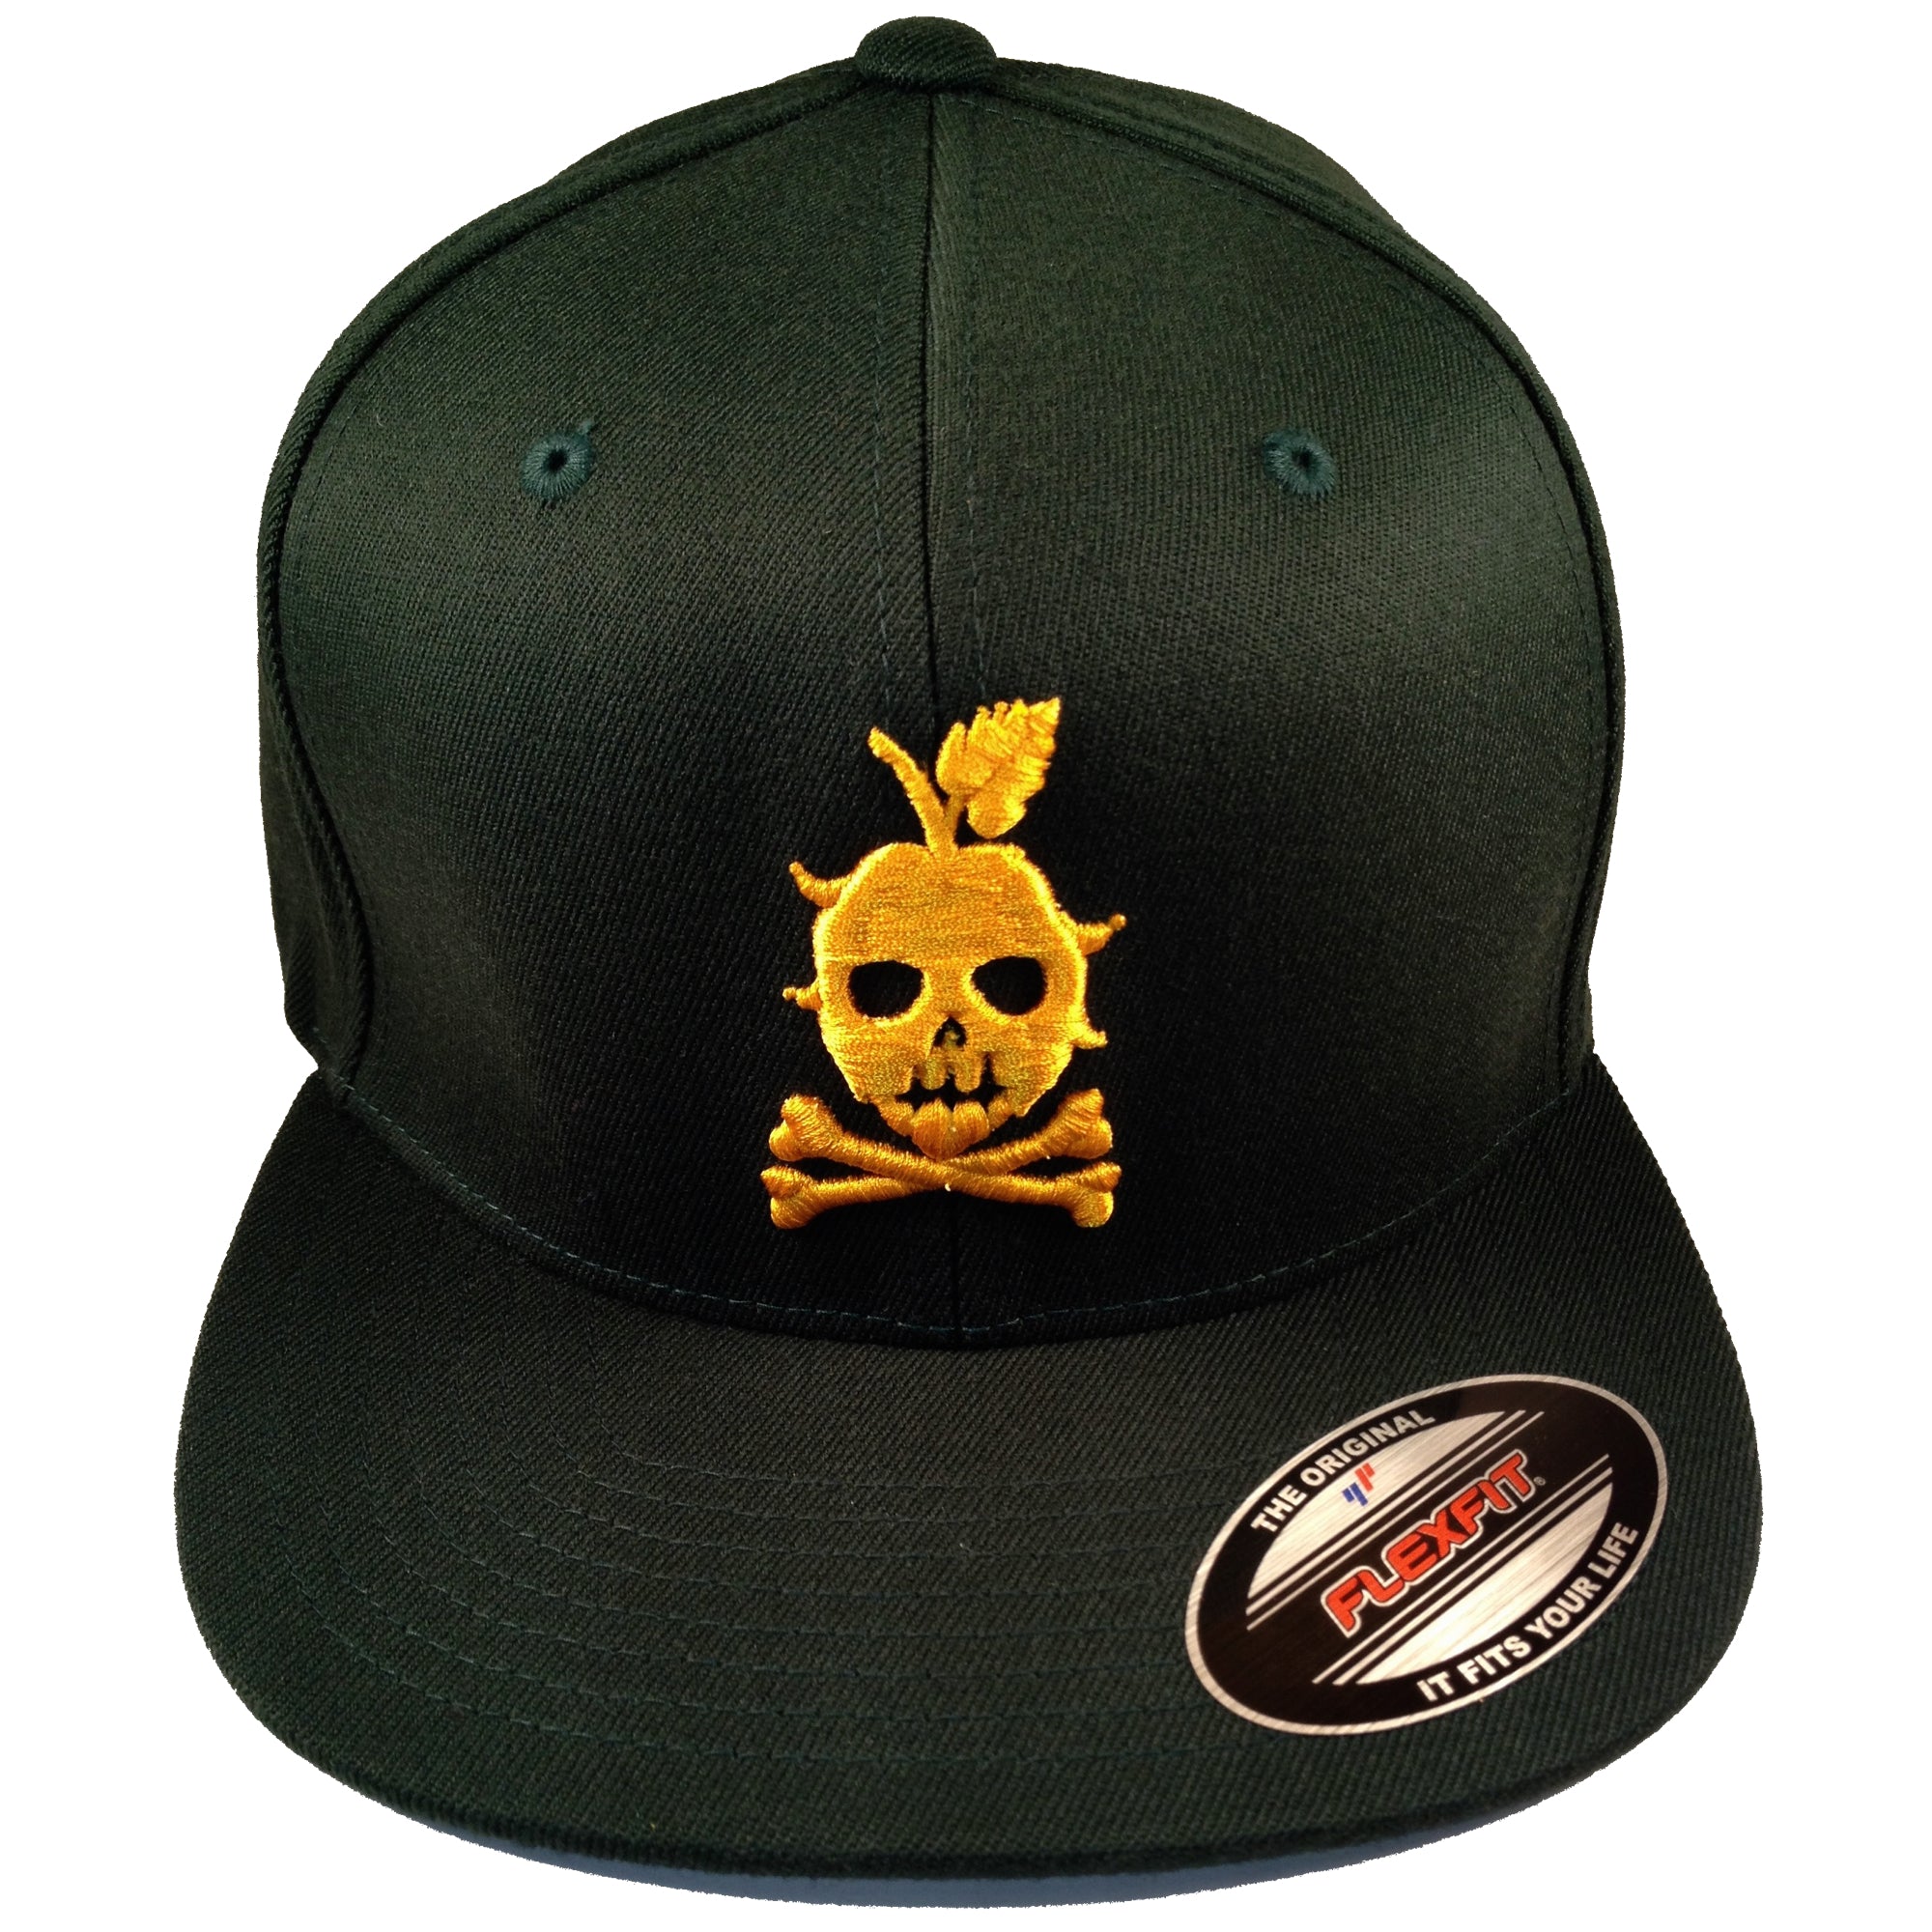 THE LOCAL CAP (Green and Gold)